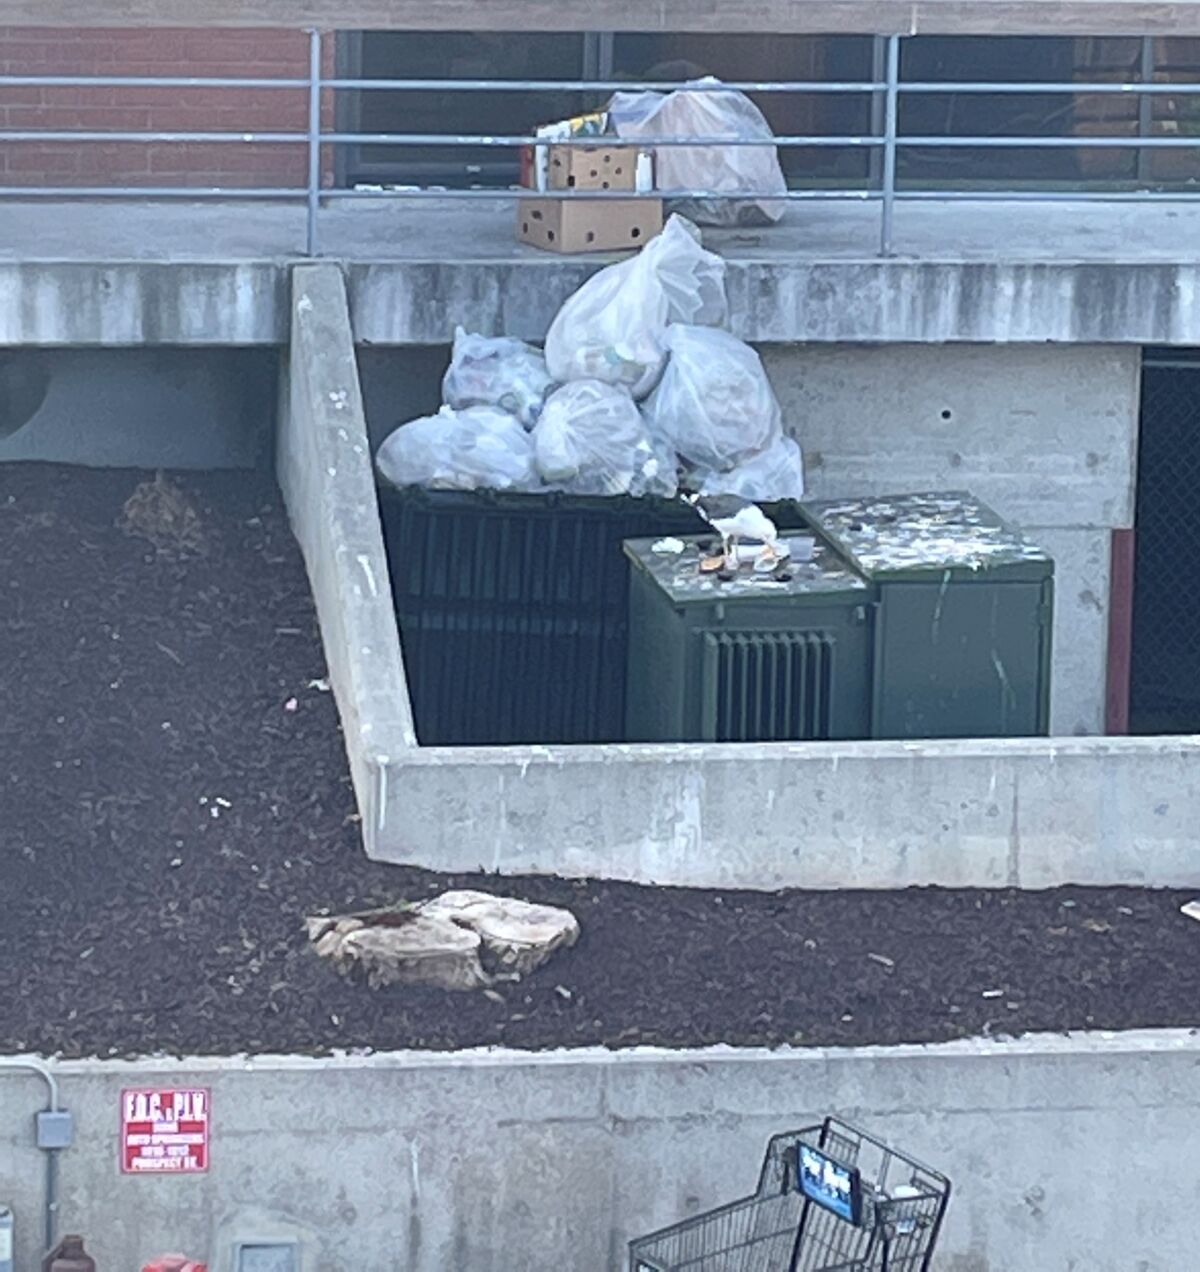 The seagull may be enjoying it, but John Sexton says food and garbage left out like this is trashing Coast Boulevard South.